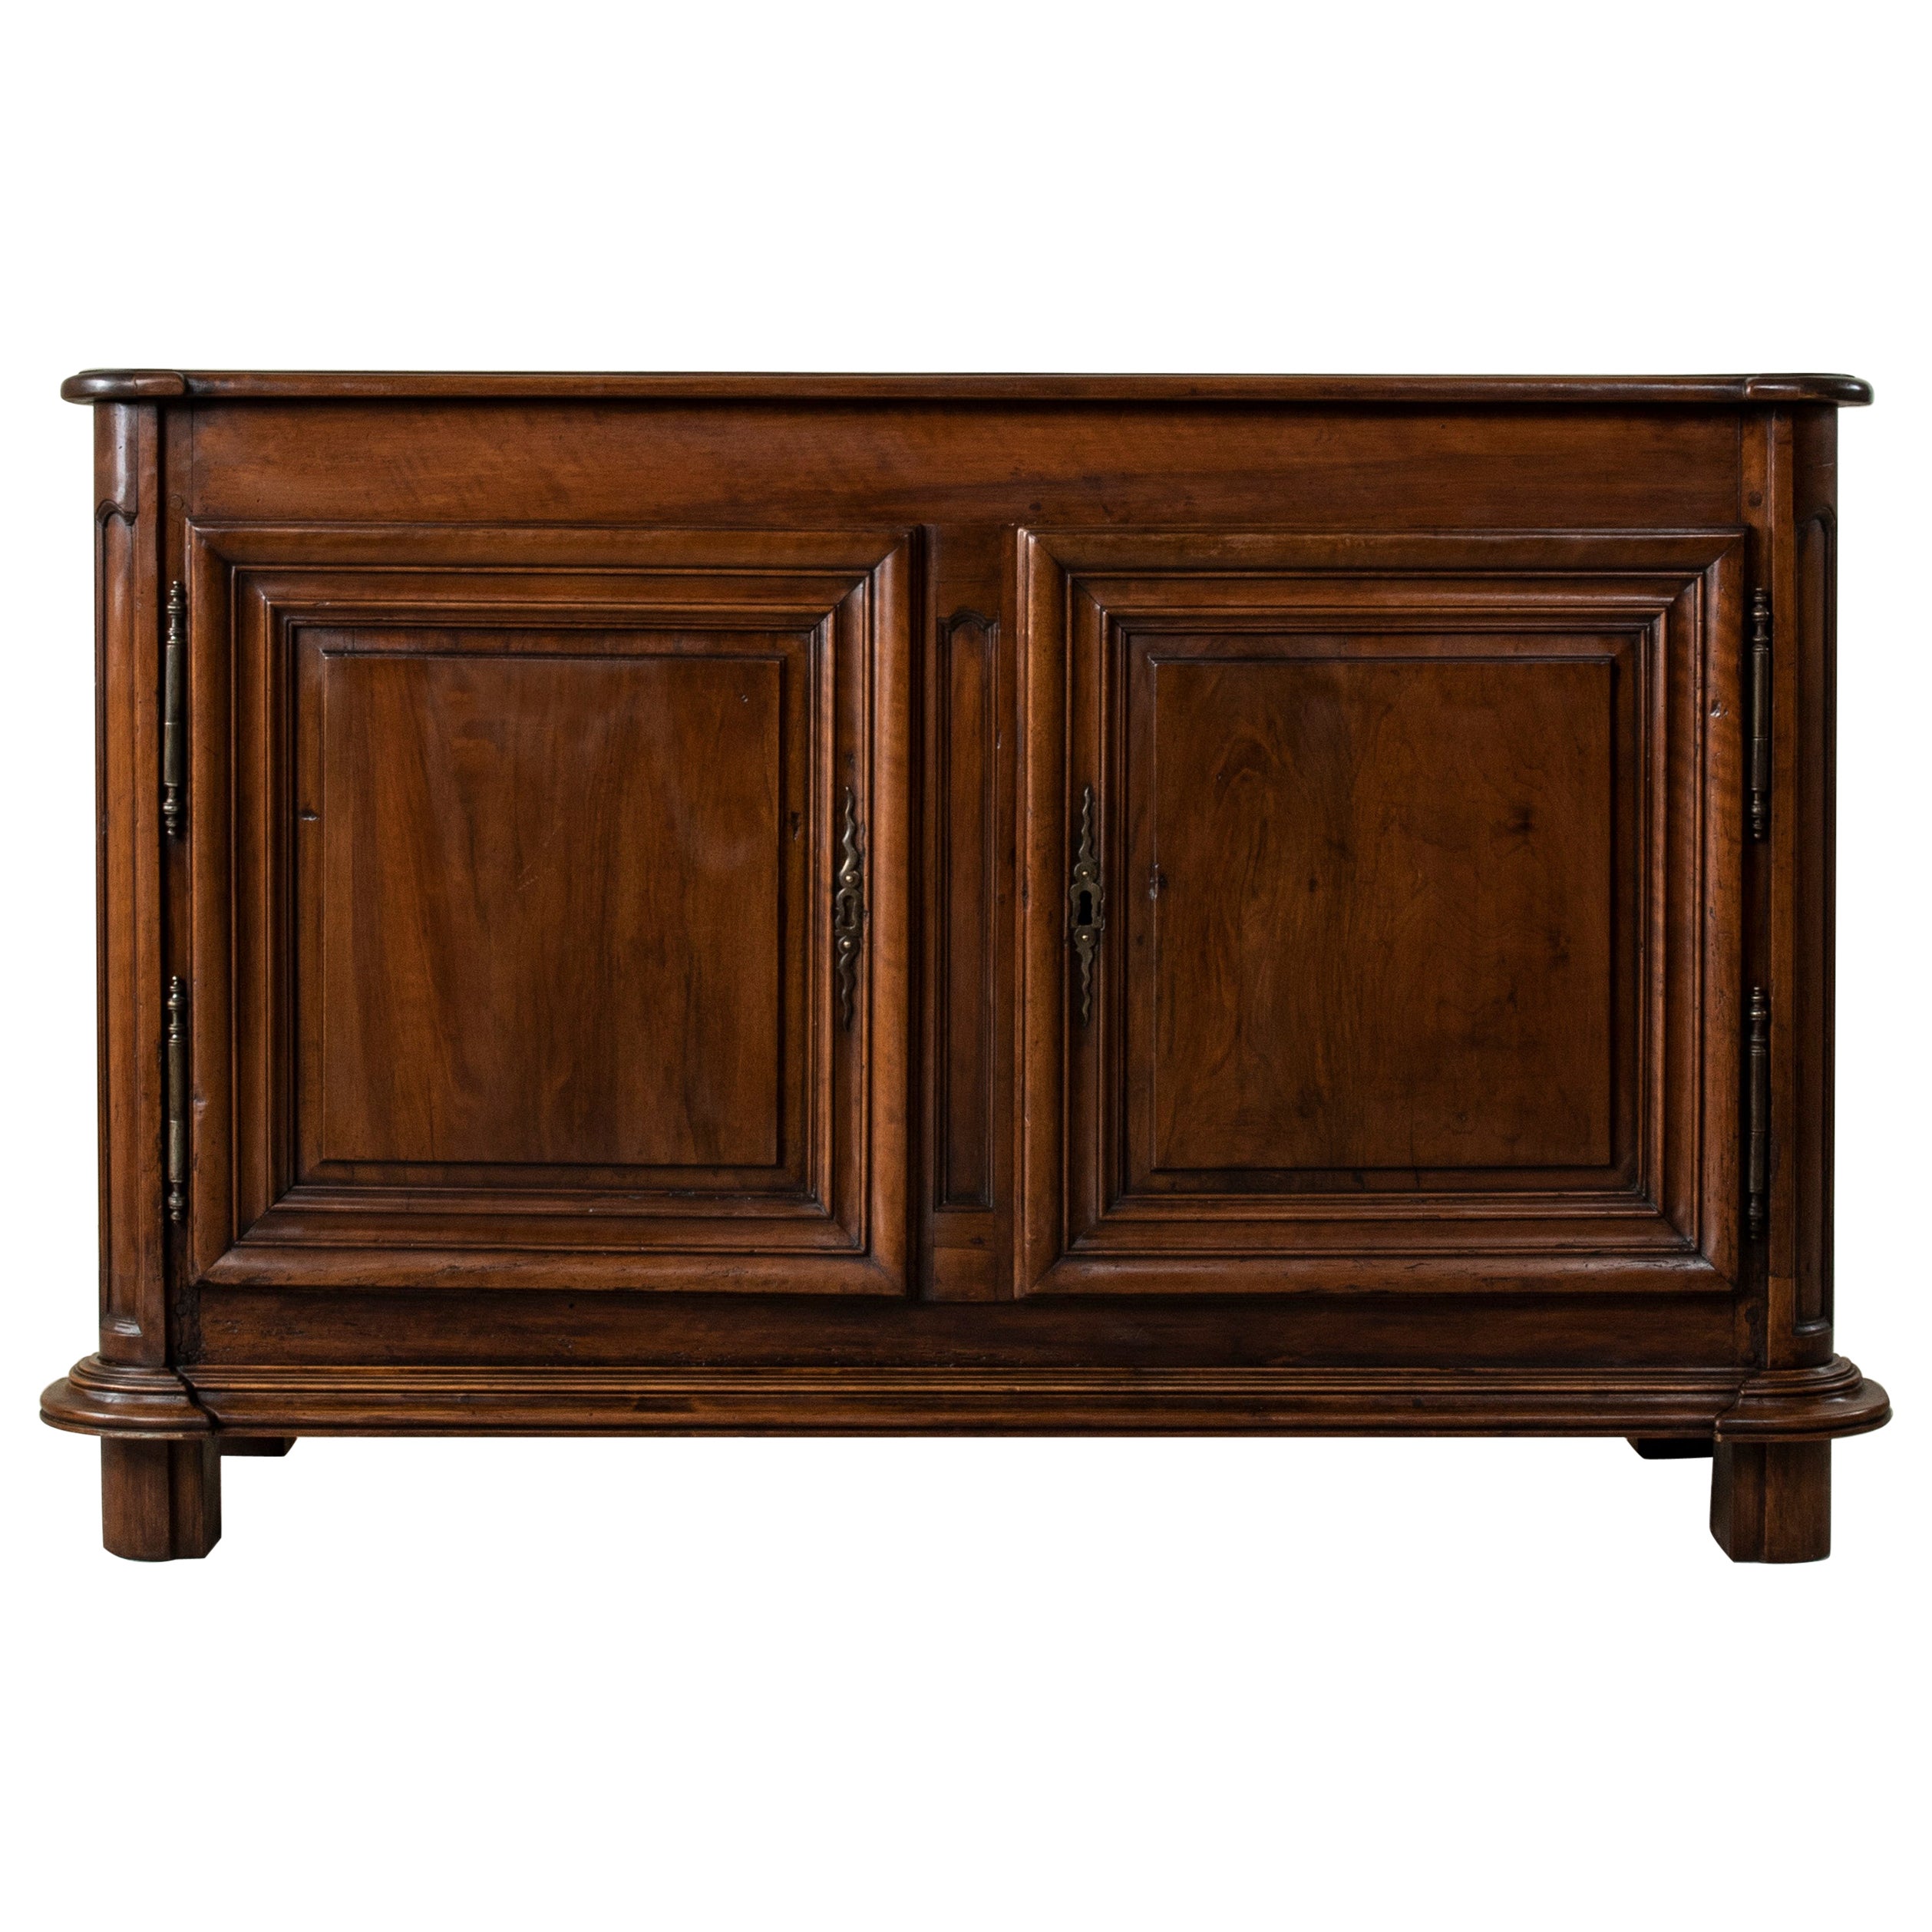 Late 18th Century French Louis XIV Style Walnut Buffet, Sideboard